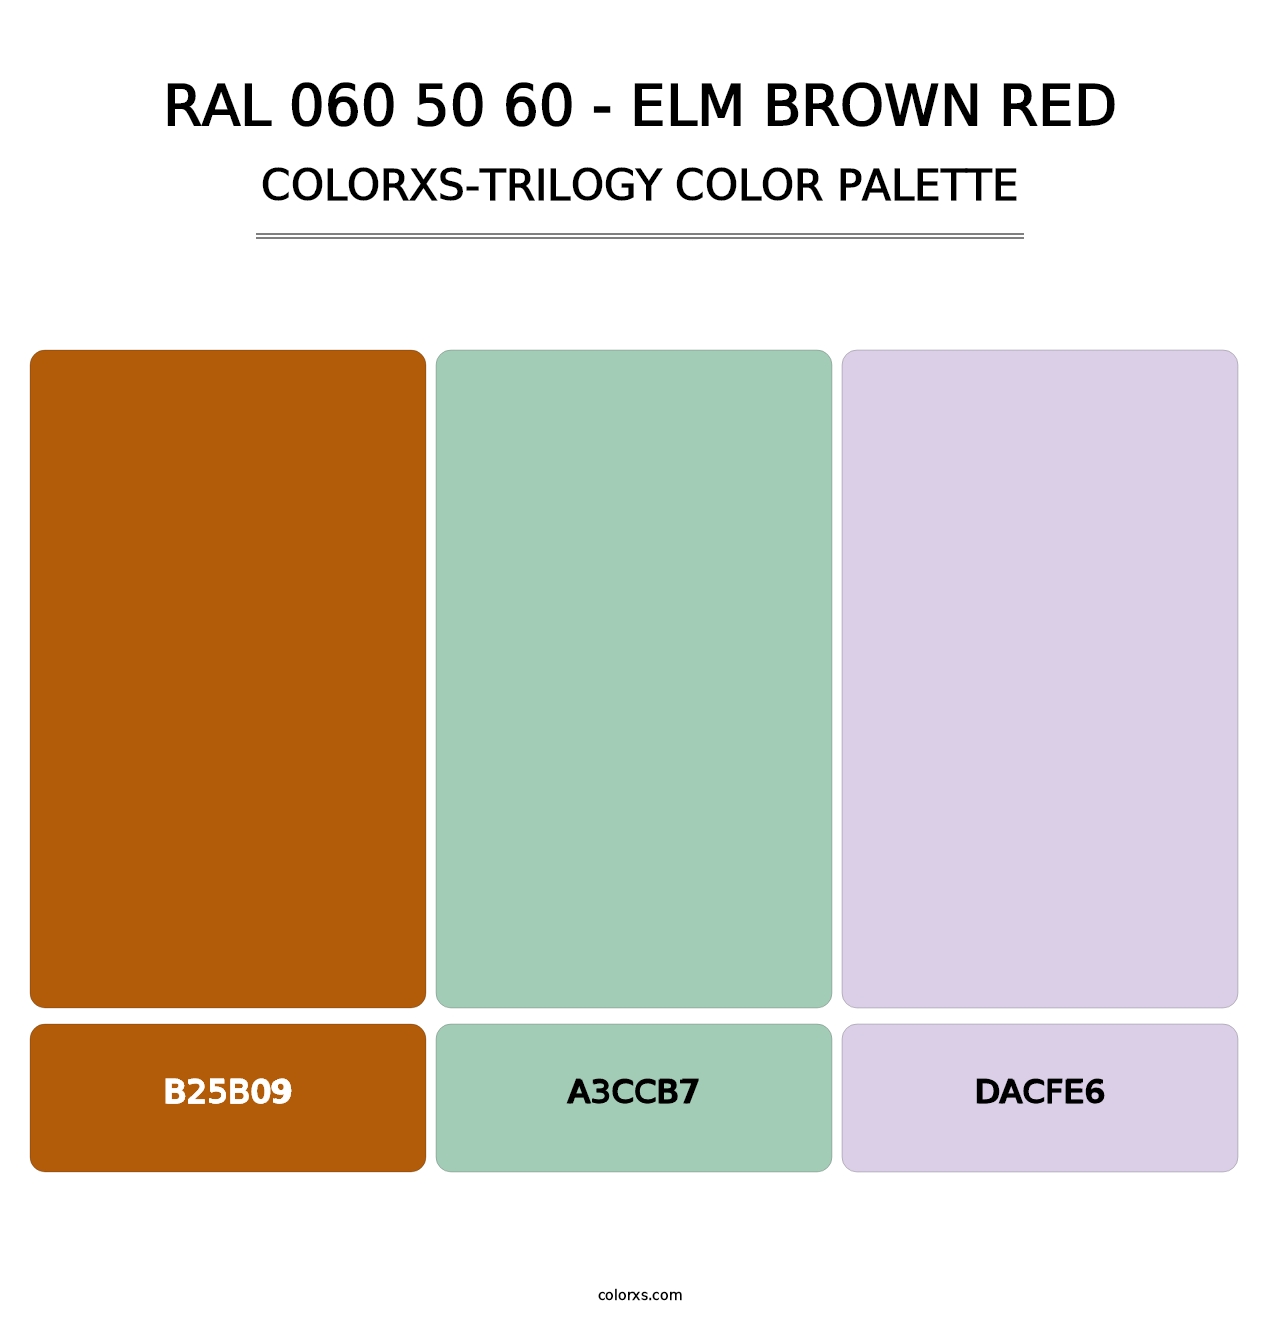 RAL 060 50 60 - Elm Brown Red - Colorxs Trilogy Palette